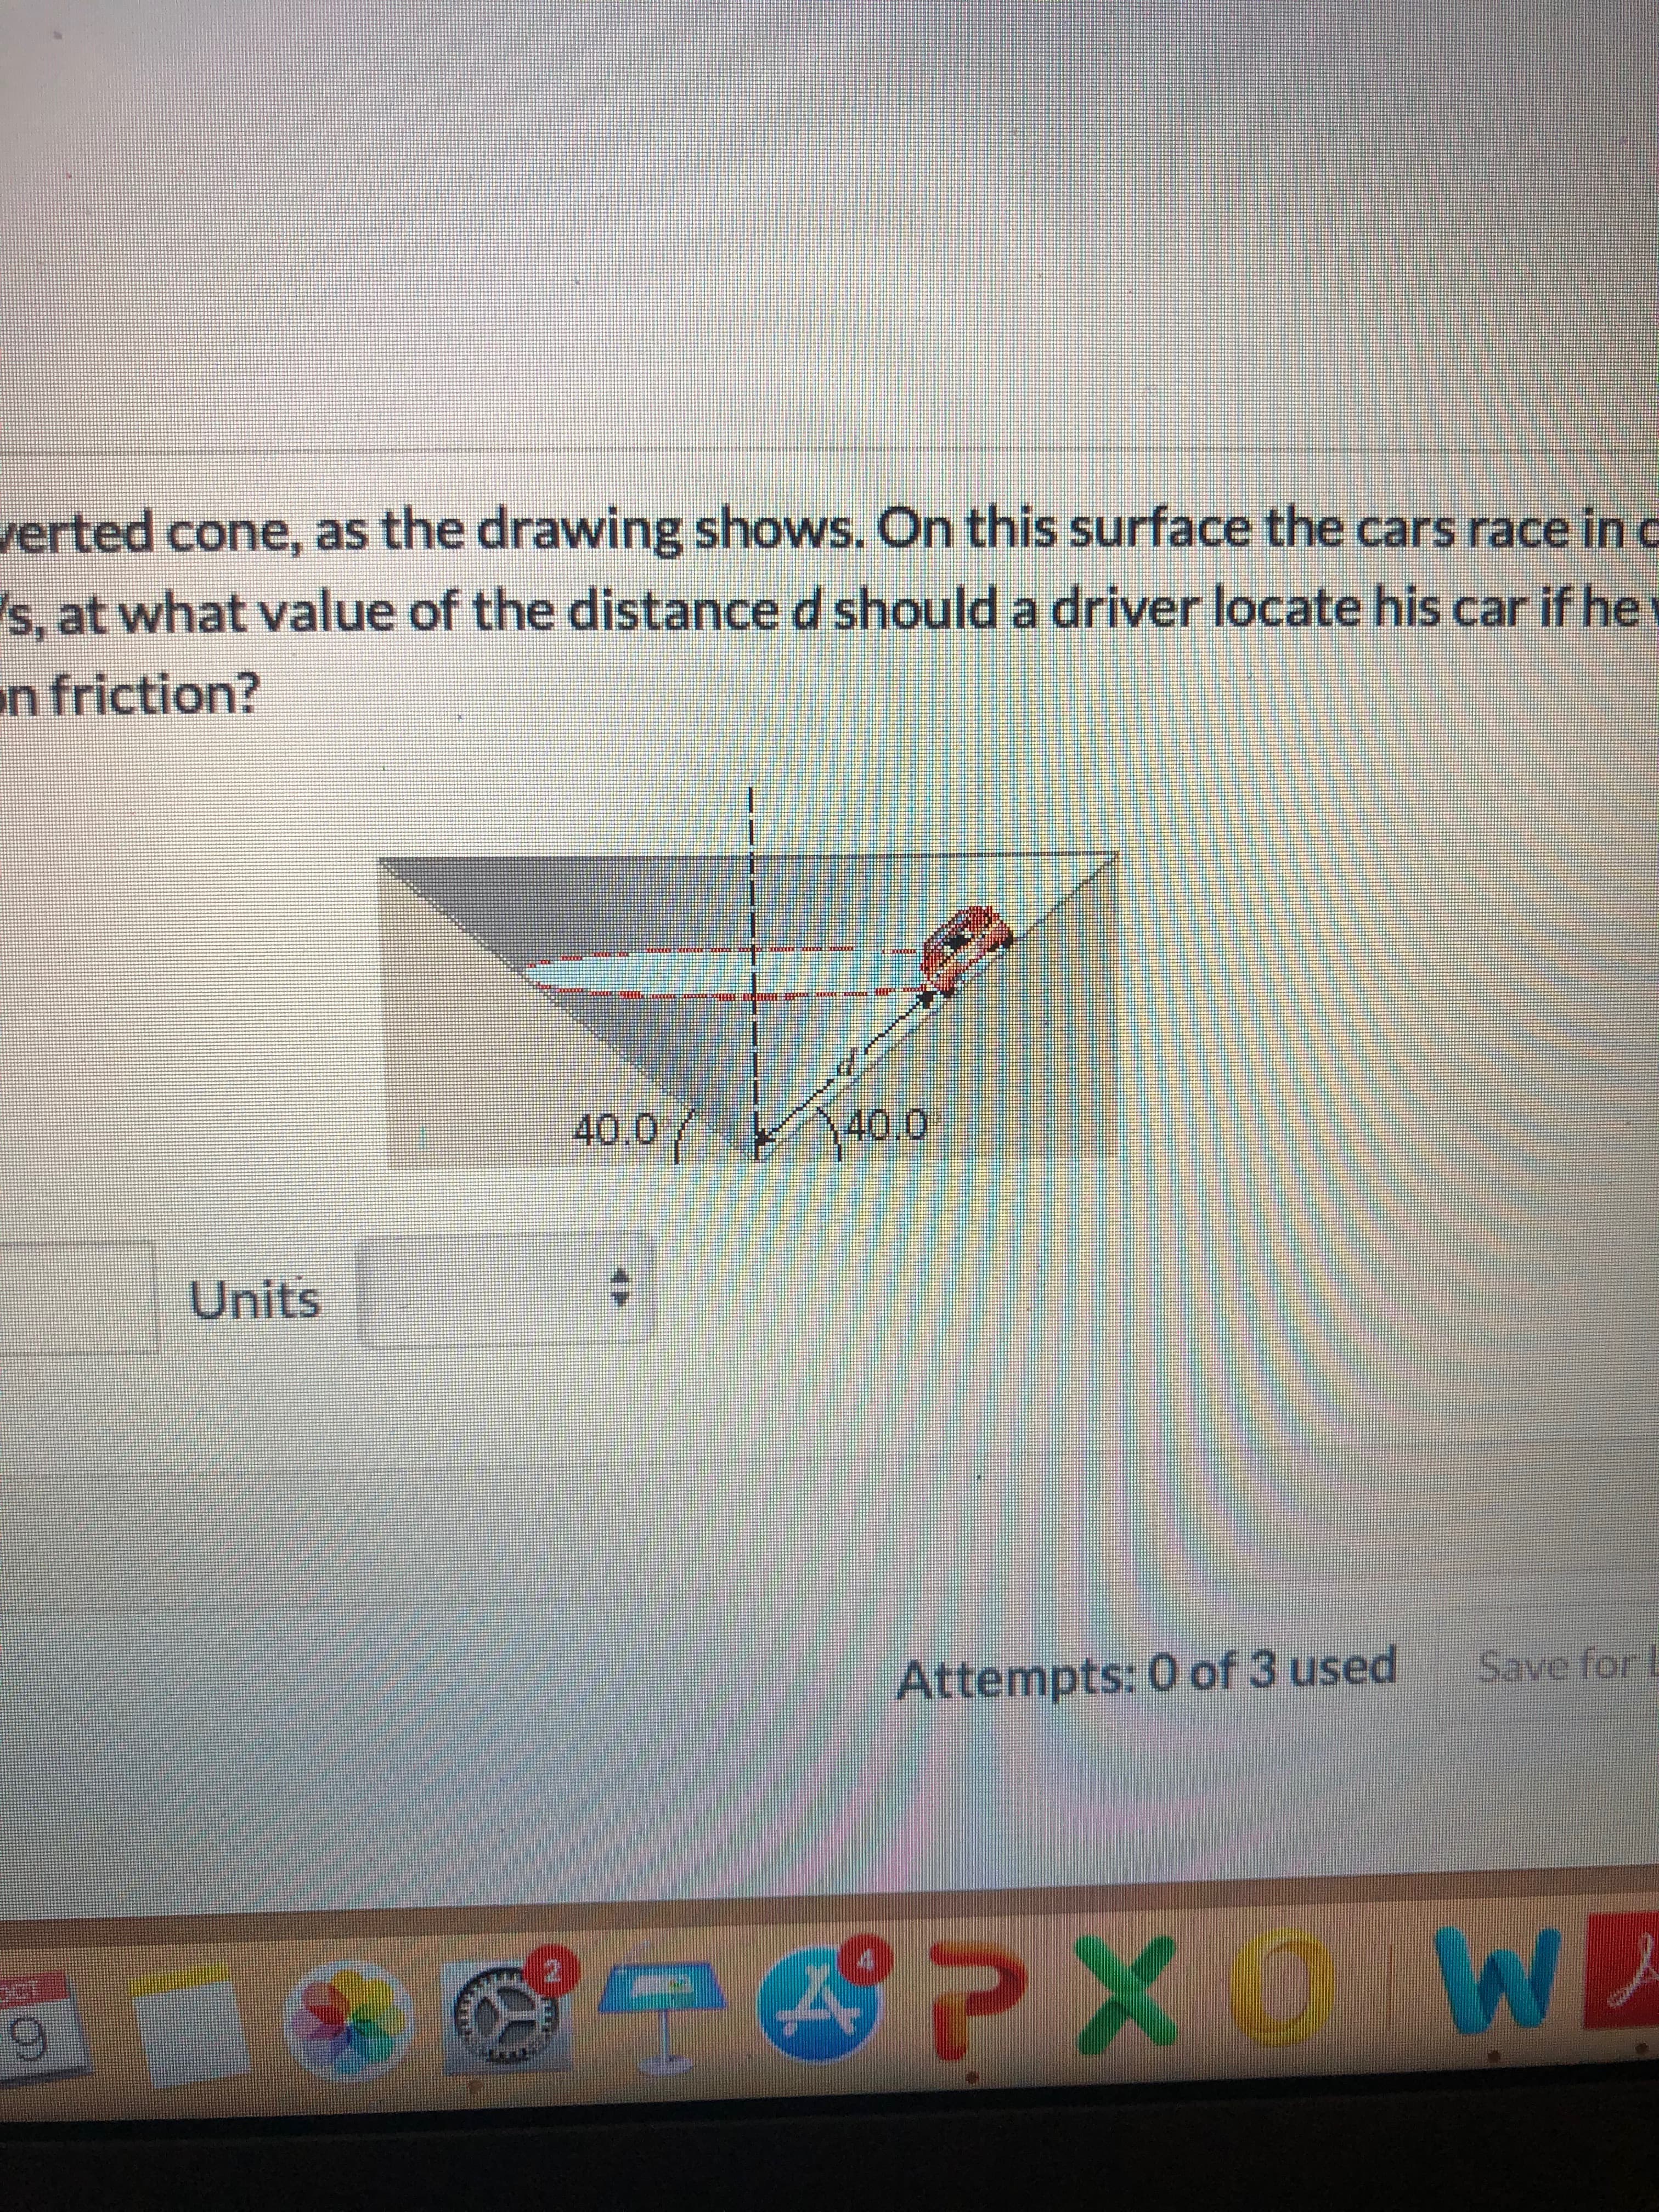 erted cone, as the drawing shows. On this surface the cars race in c
s, at what value of the distance d should a driver locate his car if he
n friction?
40.0
40.0
Units
Save for L
Attempts: 0 of 3 used
PXW
9
